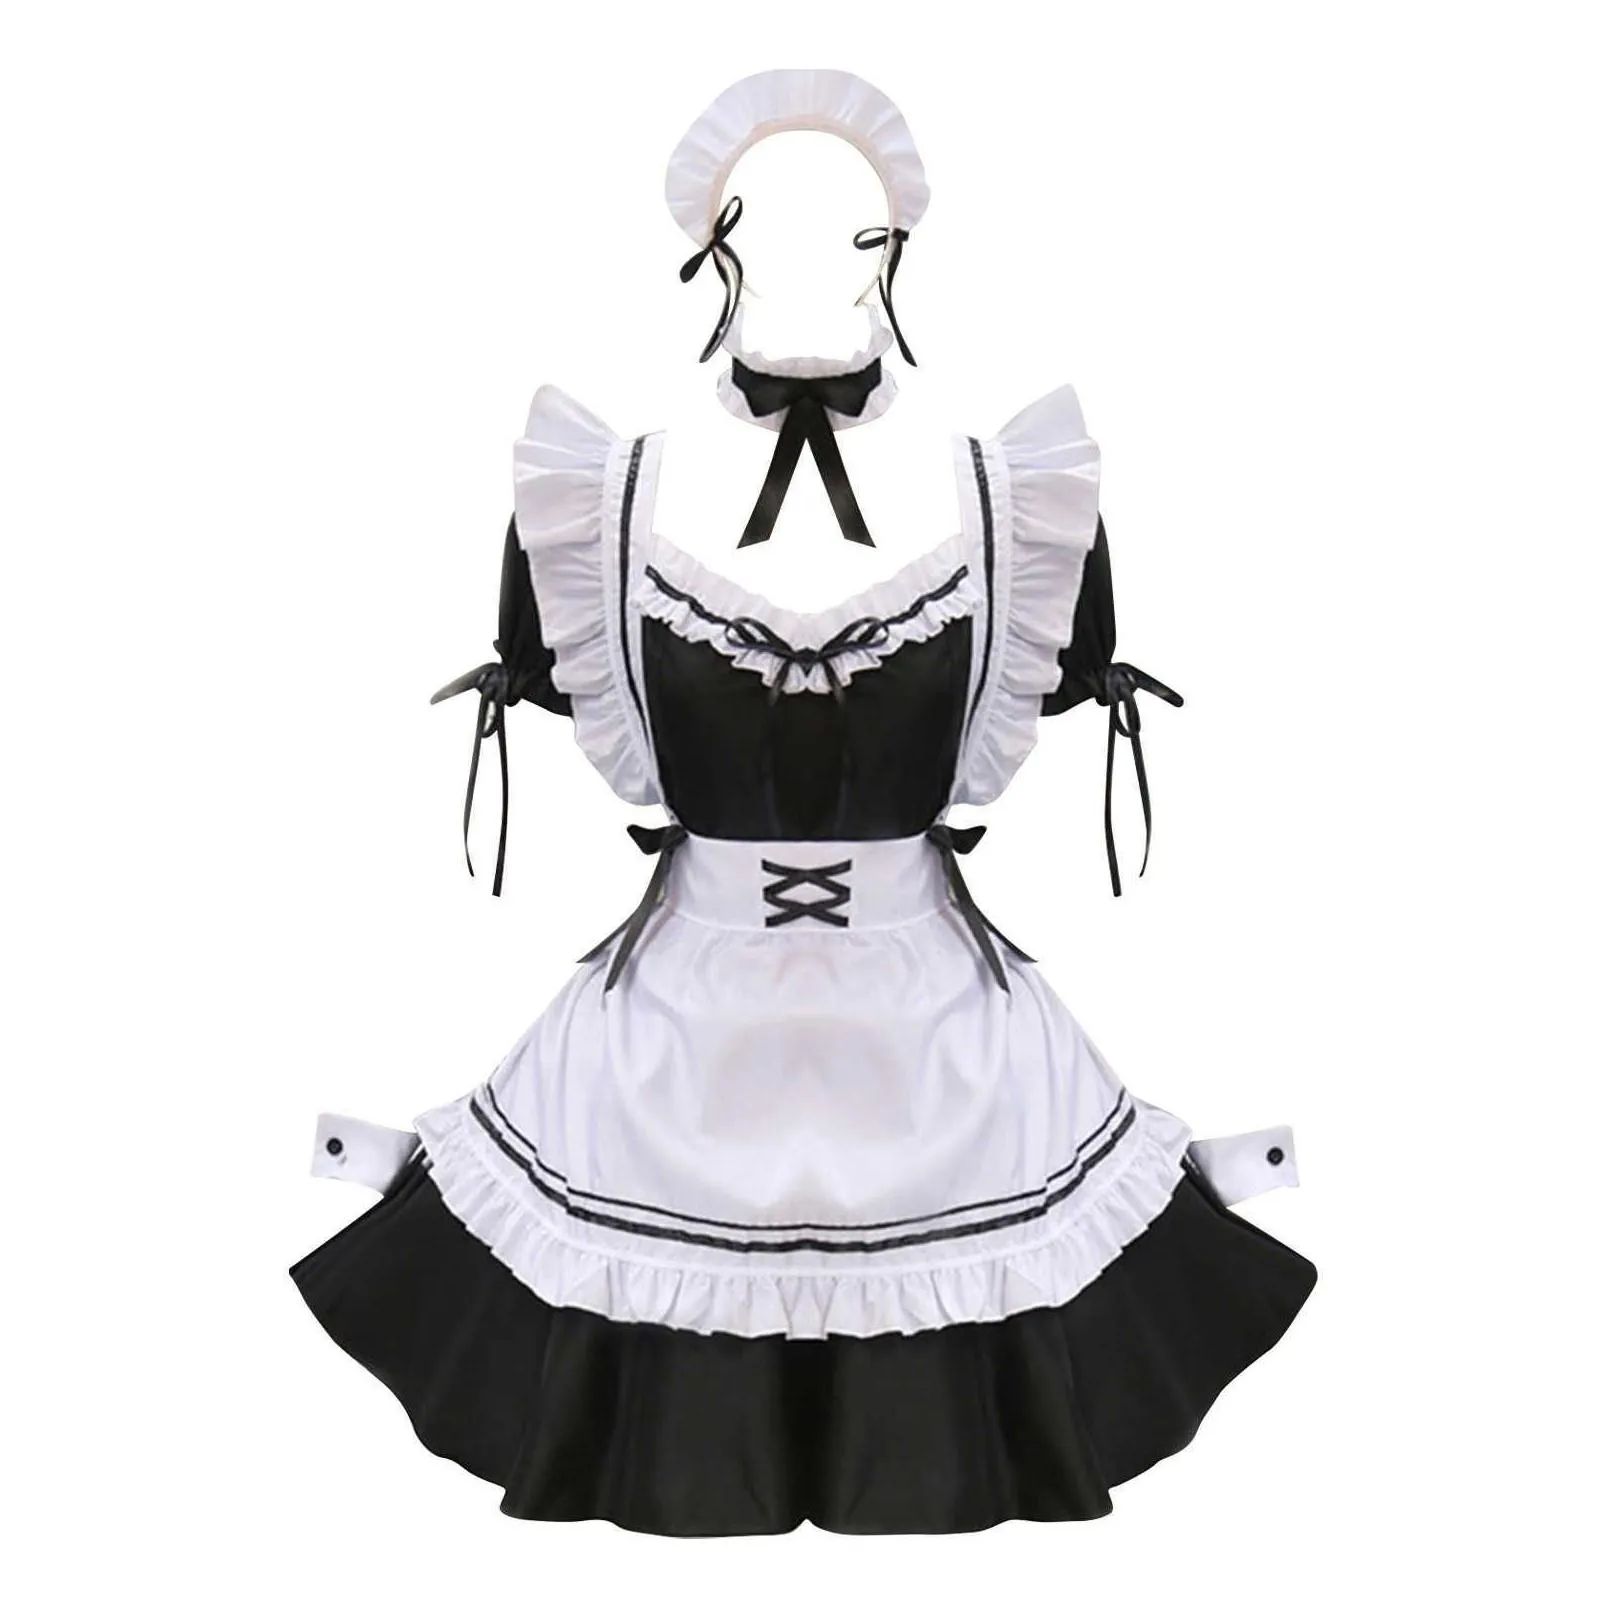 sweet lolita dress french maid waiter costume women sexy mini pinafore cute outfit halloween cosplay for girls plus size s-2xl y0827